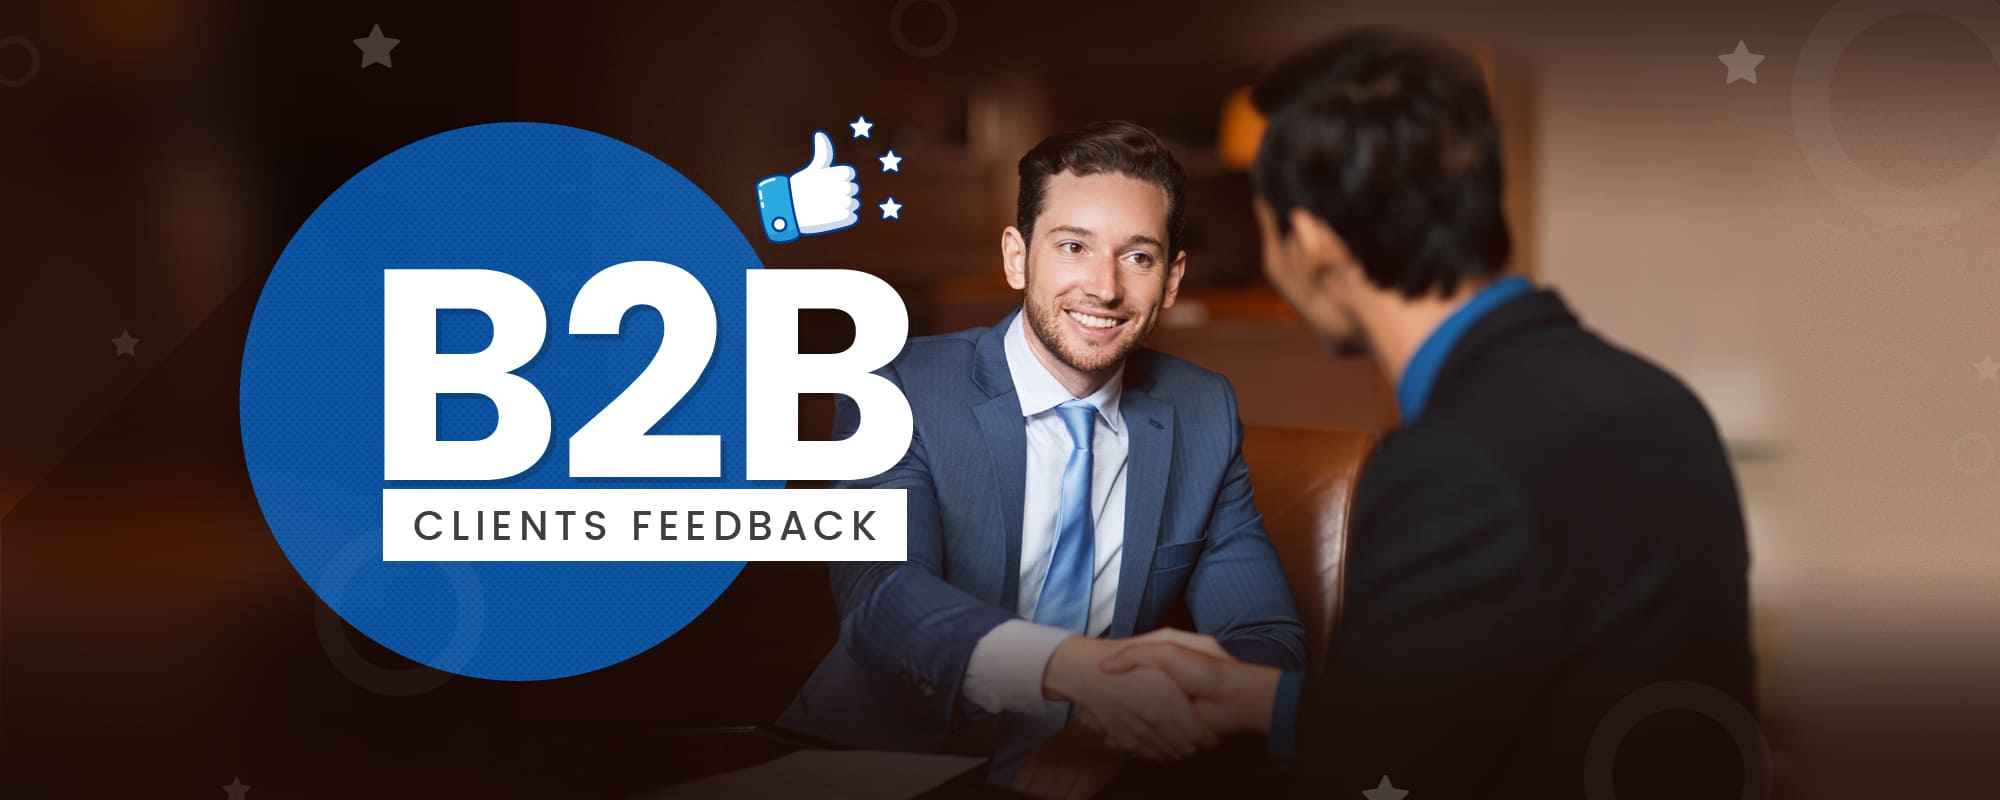 How To Get Feedback From Your B2B Clients?